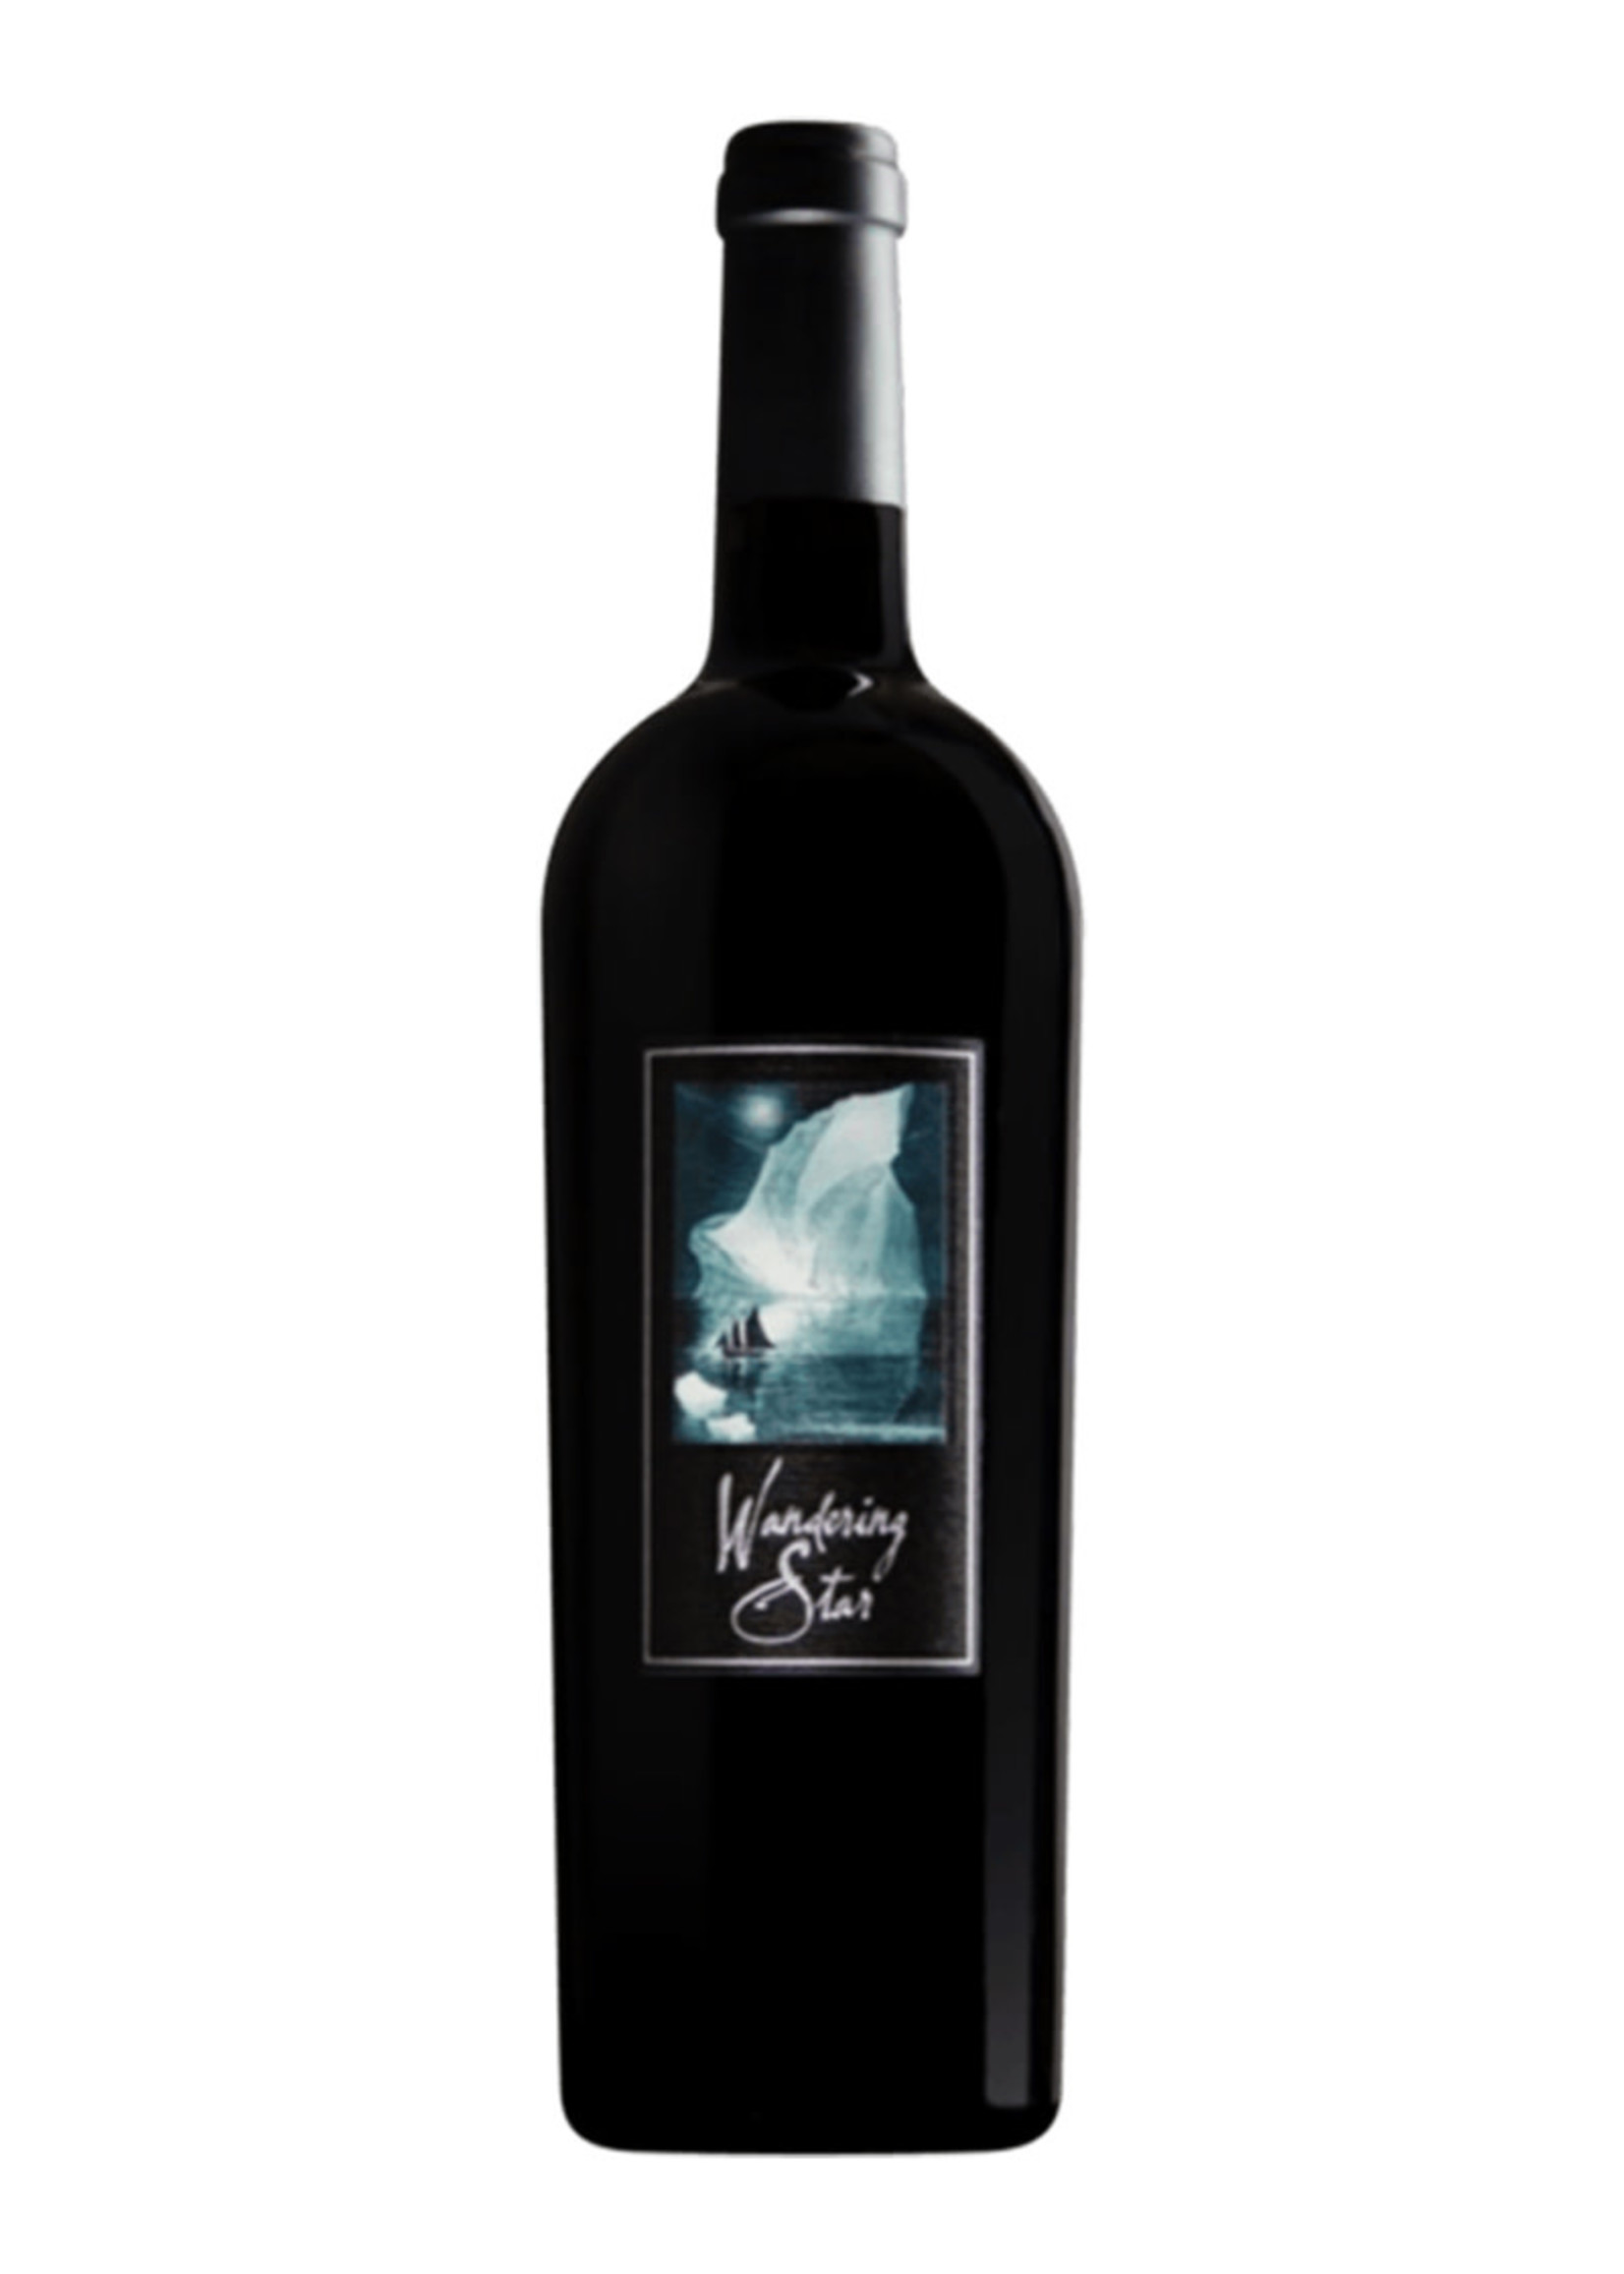 Stormy Weather 'Wandering Star' Cabernet Franc, Napa Valley, California, USA